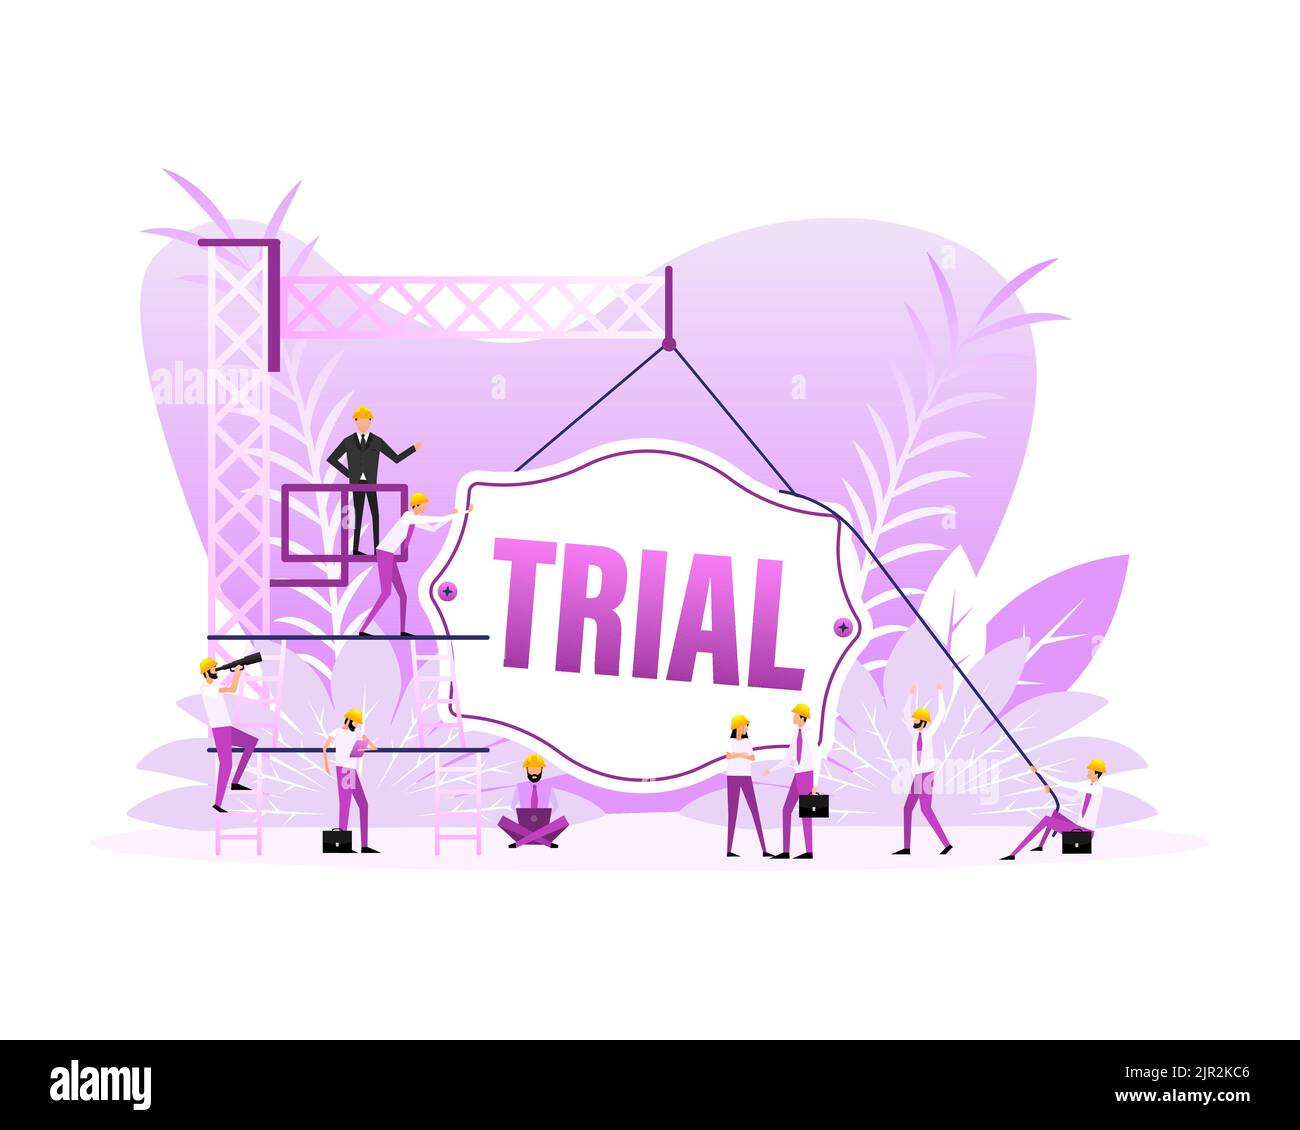 Trial sign on light background. Flat style people. Vector illustration. Stock Vector